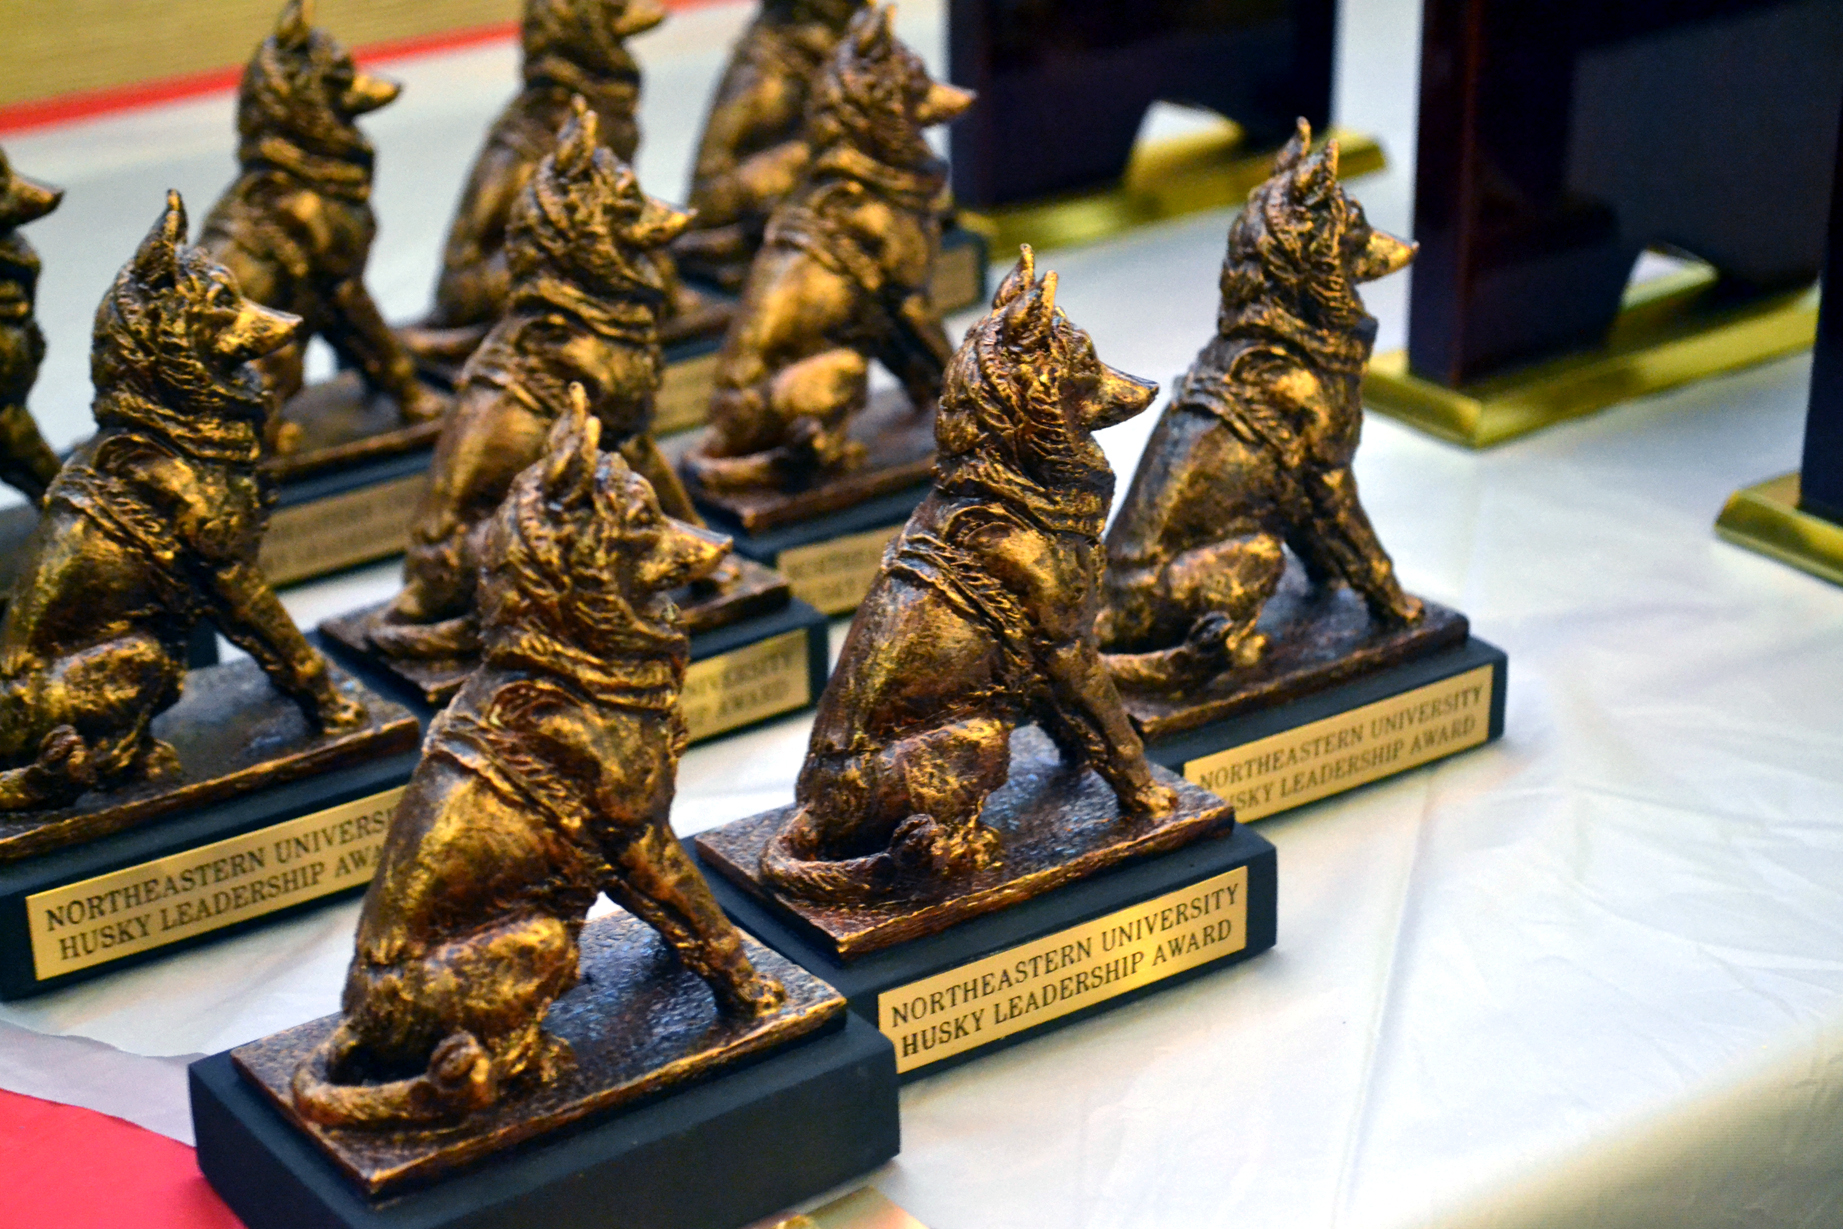 A table with around 10 Student Life awards. The awards have a husky figure on the top, followed by a nameplate